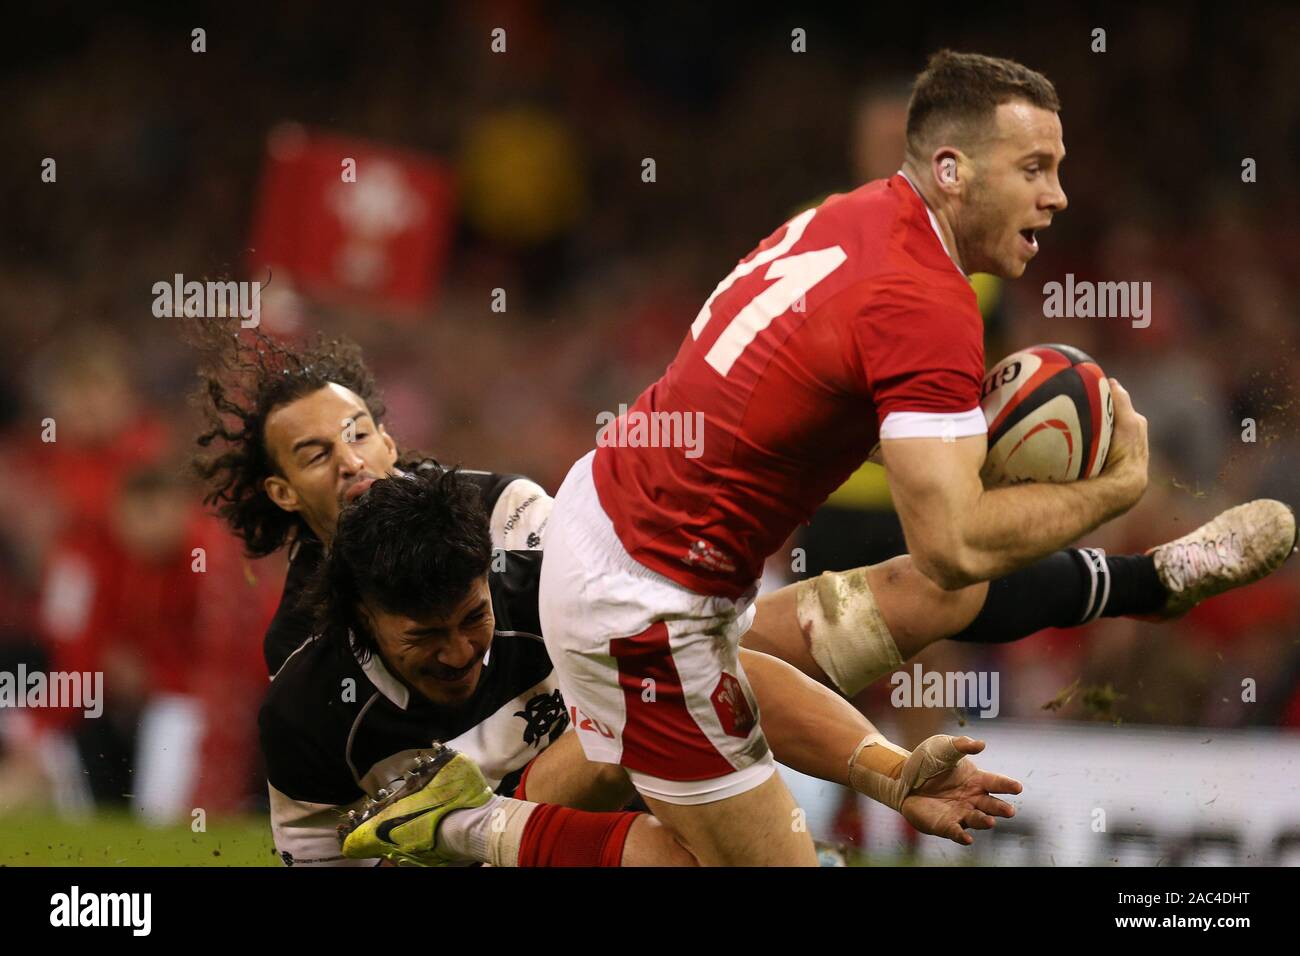 Cardiff, UK. 30th Nov, 2019. Gareth Davies of Wales beats his Barbarian tacklers to score a try. Wales v Barbarians rugby at the Principality Stadium in Cardiff, Wales, UK on Saturday 30th November 2019. pic by Andrew Orchard/Alamy Live News PLEASE NOTE PICTURE AVAILABLE FOR EDITORIAL USE ONLY Stock Photo